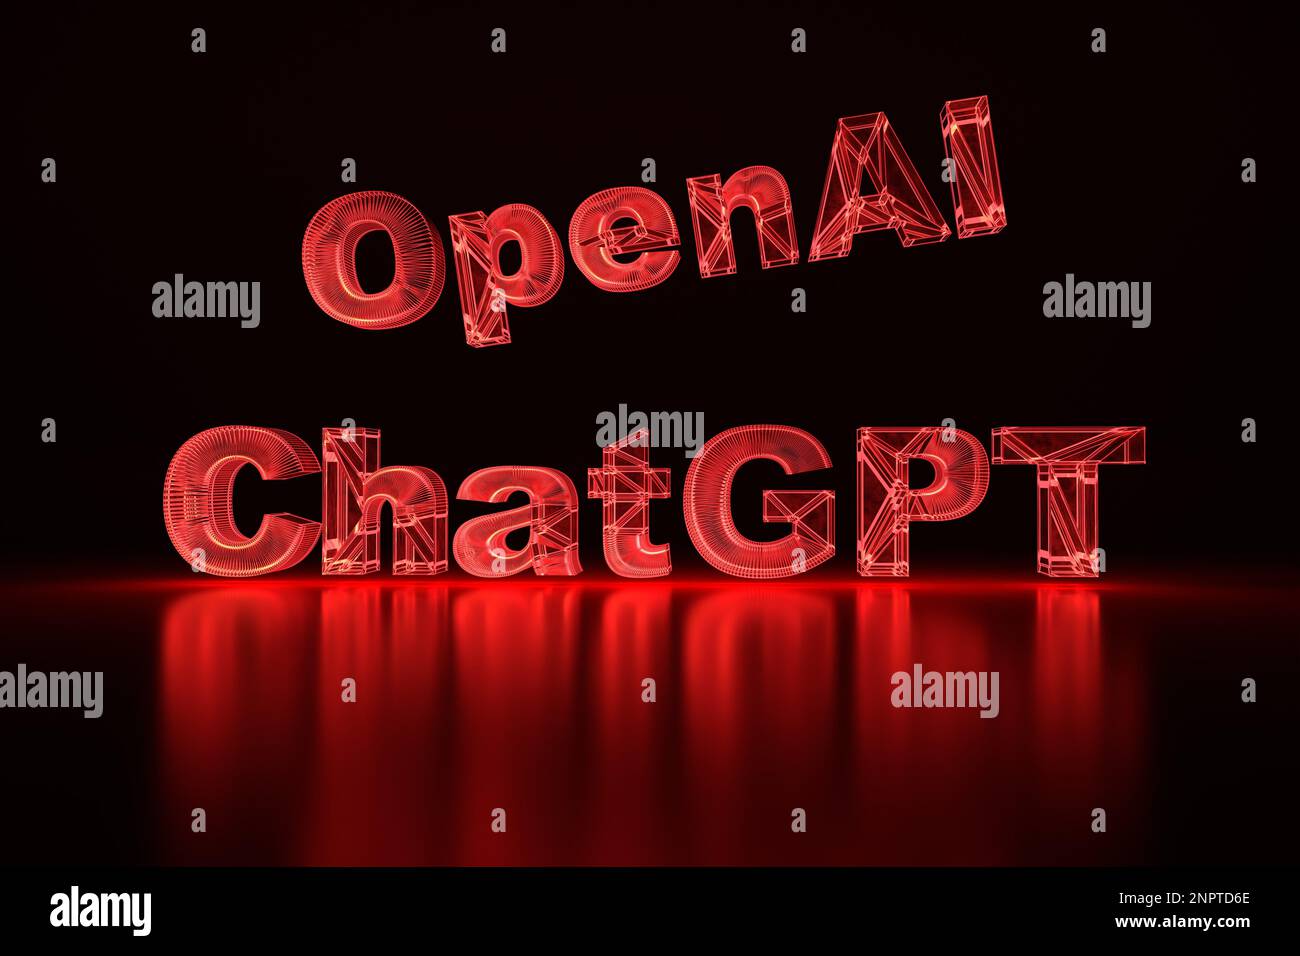 February 20, 2023 - Caen, France: Neon luminous lettering - OpenAI and chatGPT. 3D render. Stock Photo